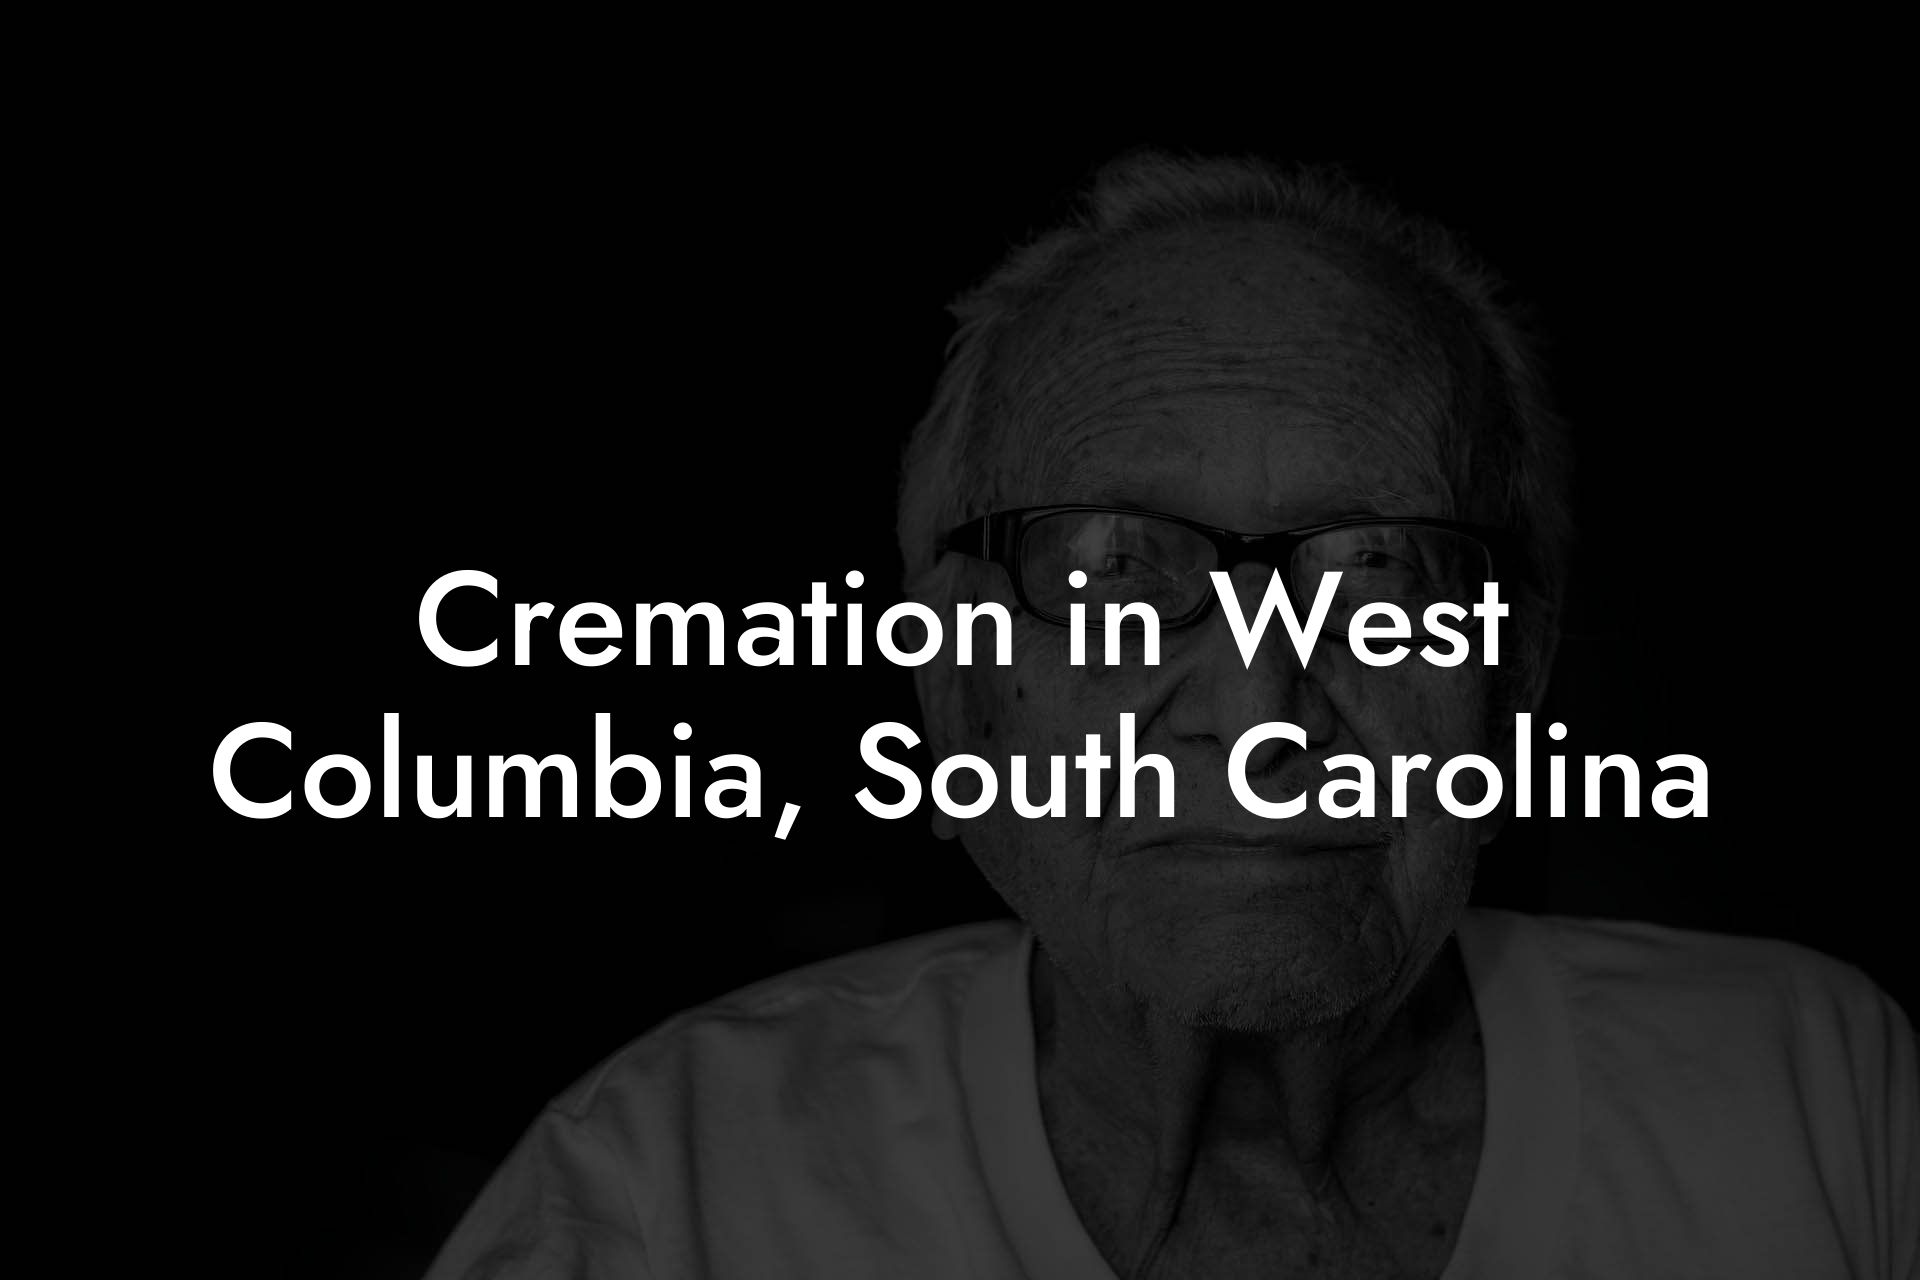 Cremation in West Columbia, South Carolina